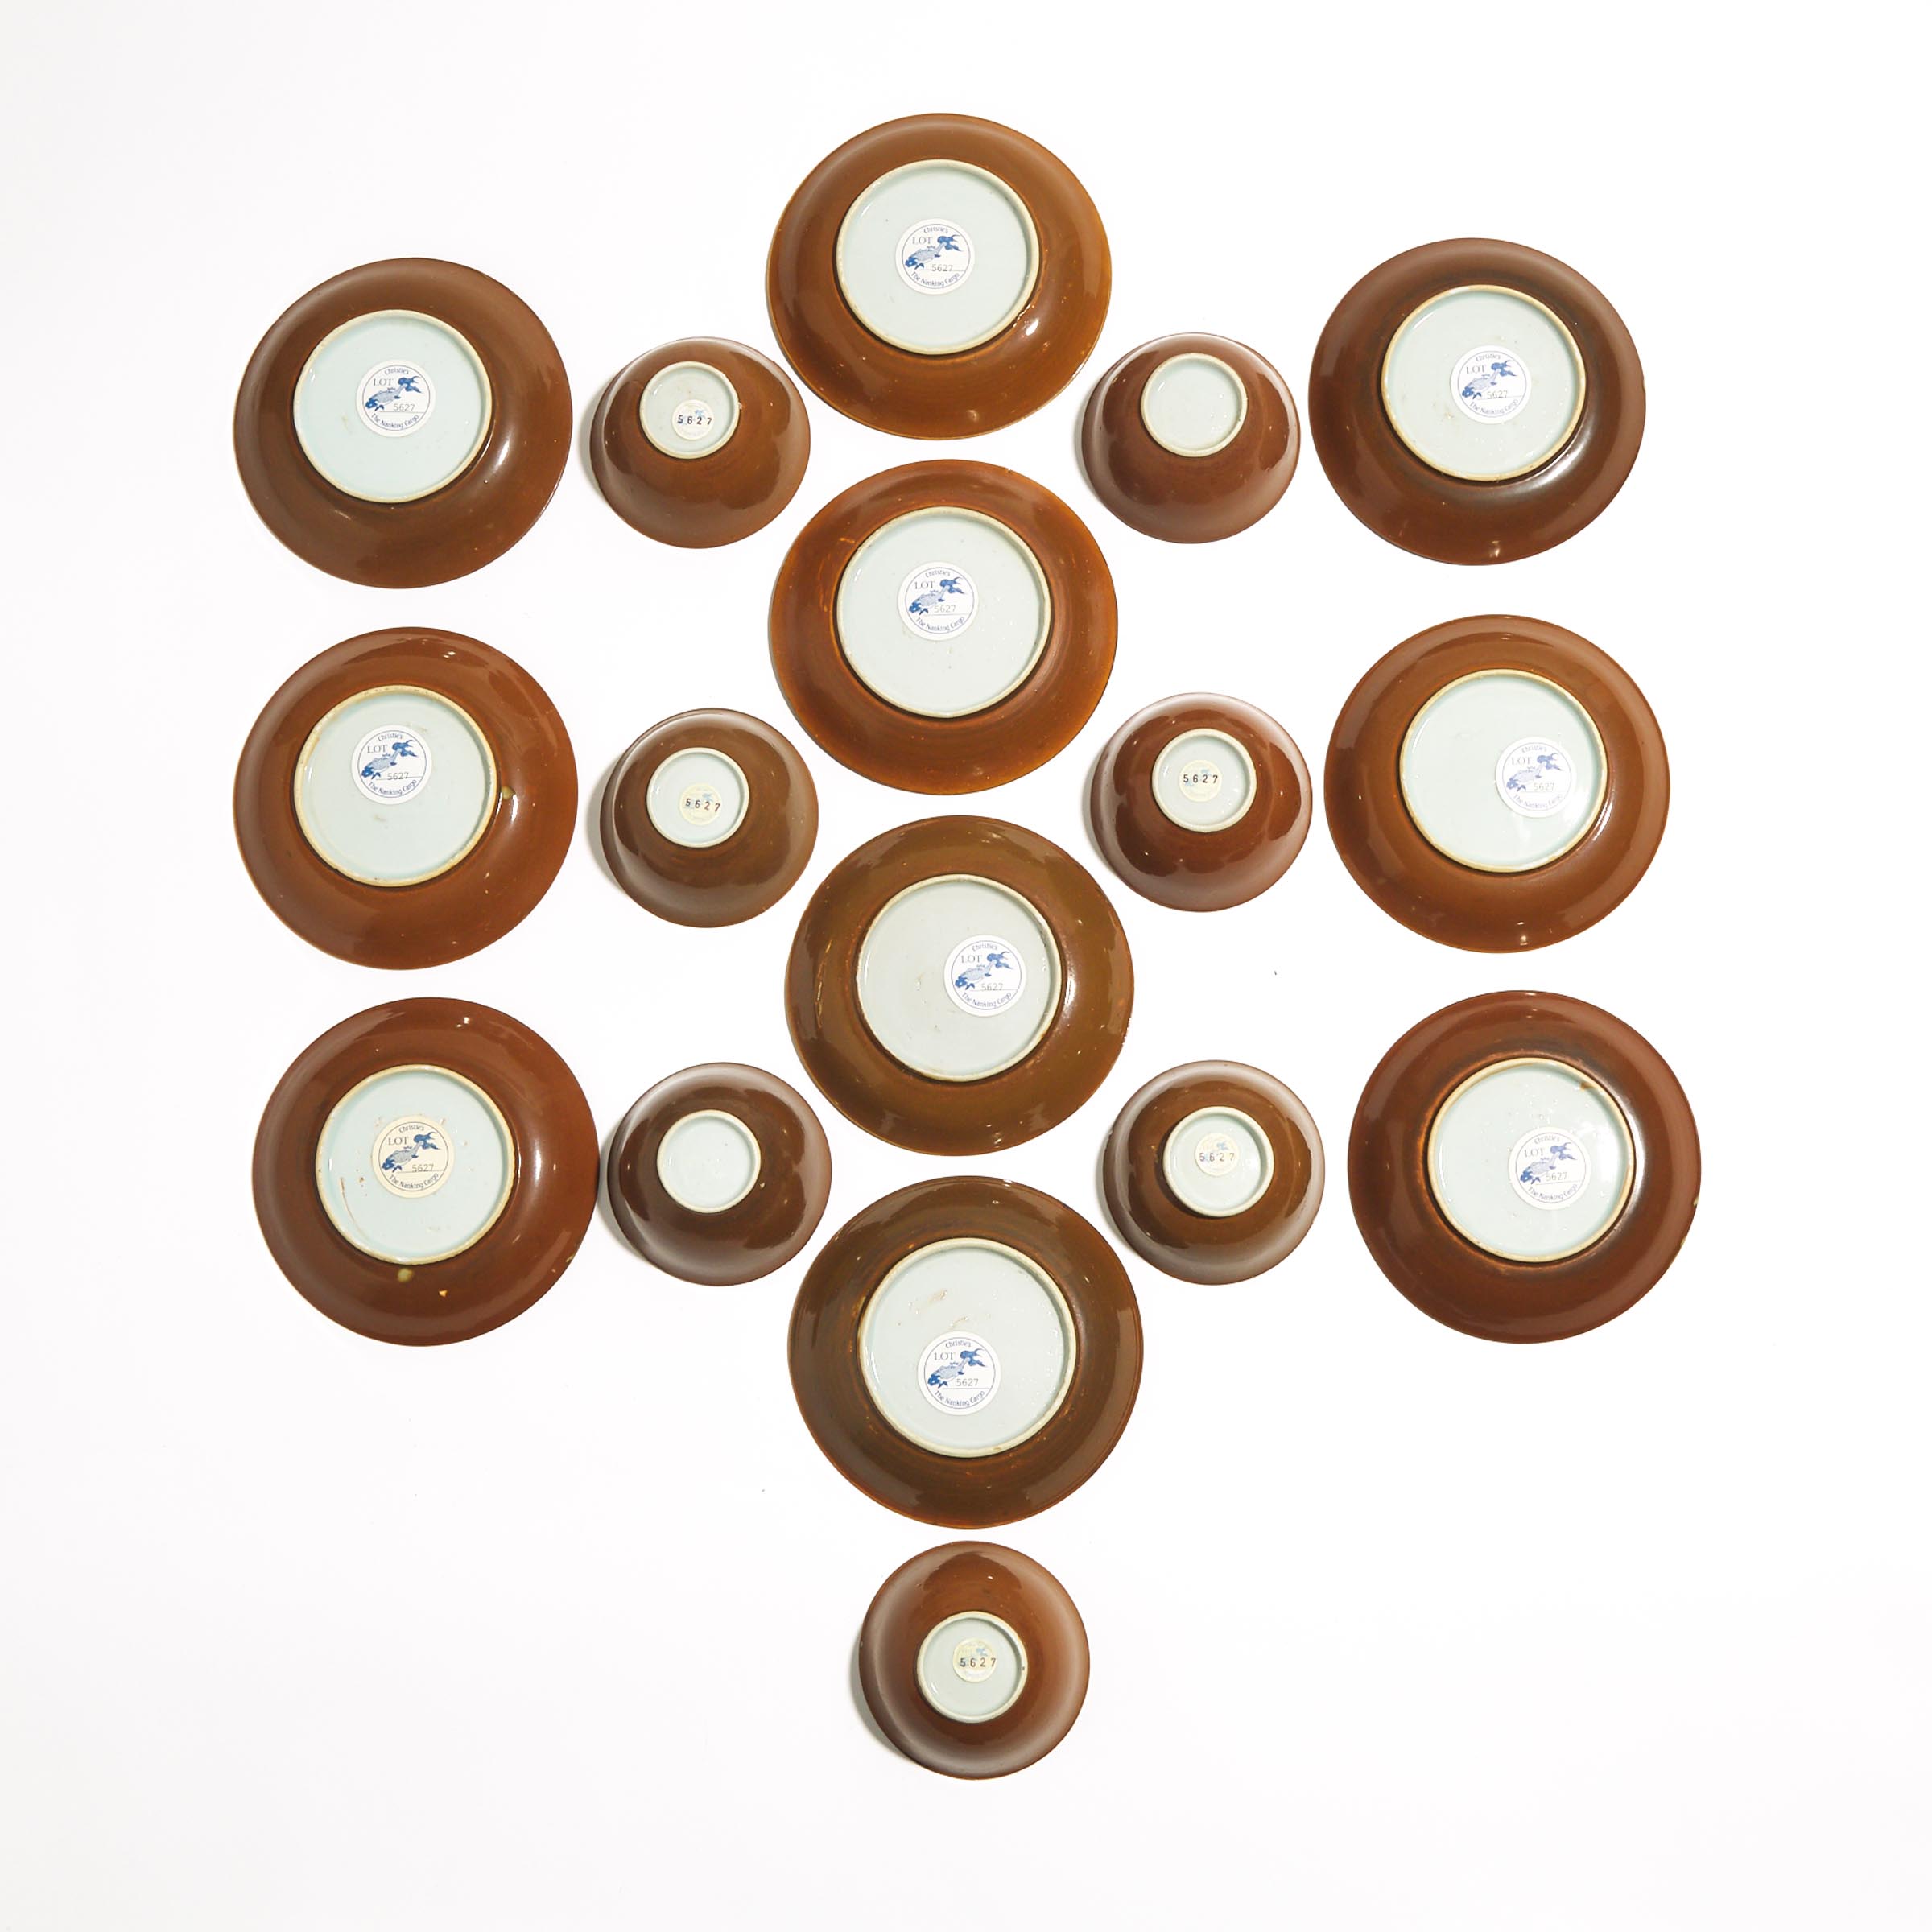 A Set of Seventeen 'Batavian Pavilion' Pattern Teabowls and Saucers from the Nanking Cargo, Qianlong Period, Circa 1750